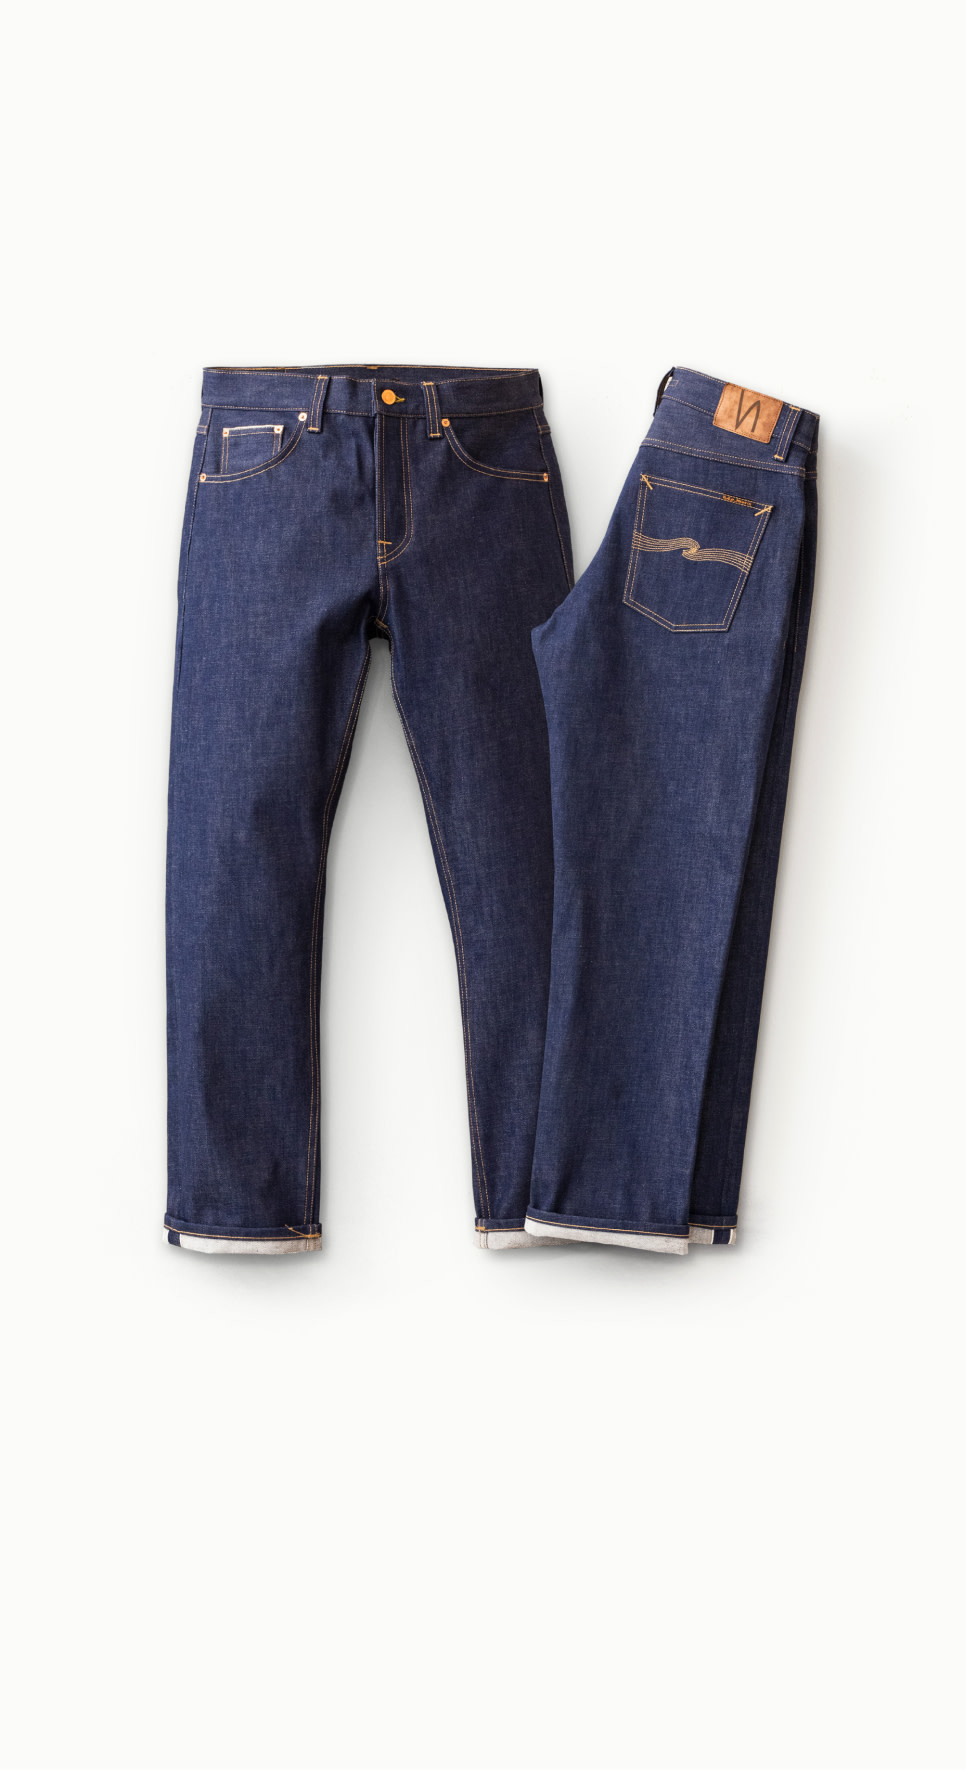 Bake Your Own Jeans Peggs & Son